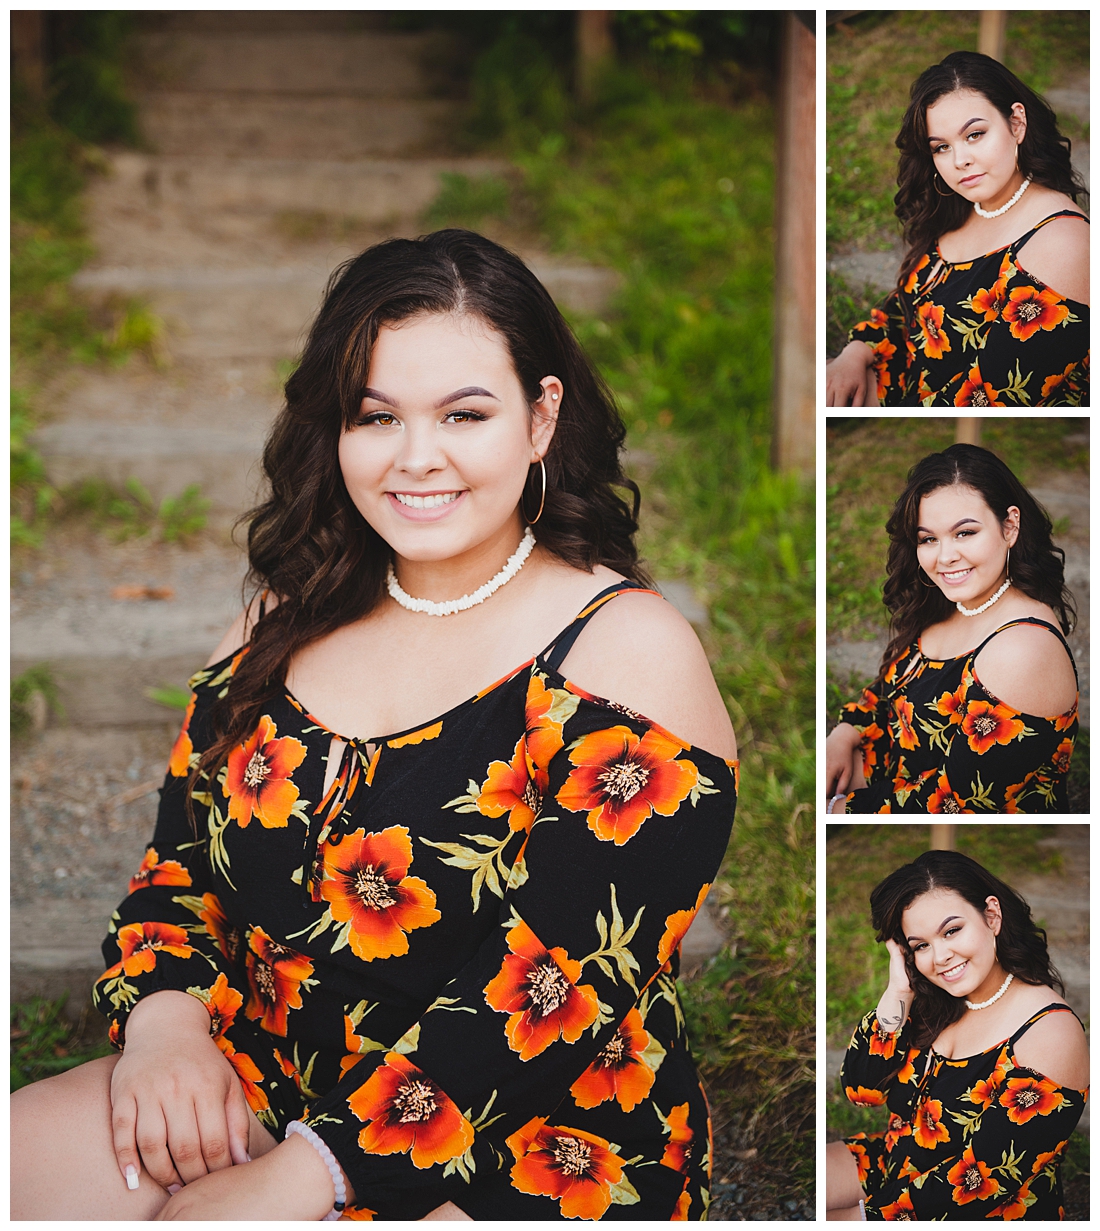 Cute Senior Portraits in Tacoma on the Beach in a Floral Romper Photographed by Tacoma Senior Photographer Amanda Howse